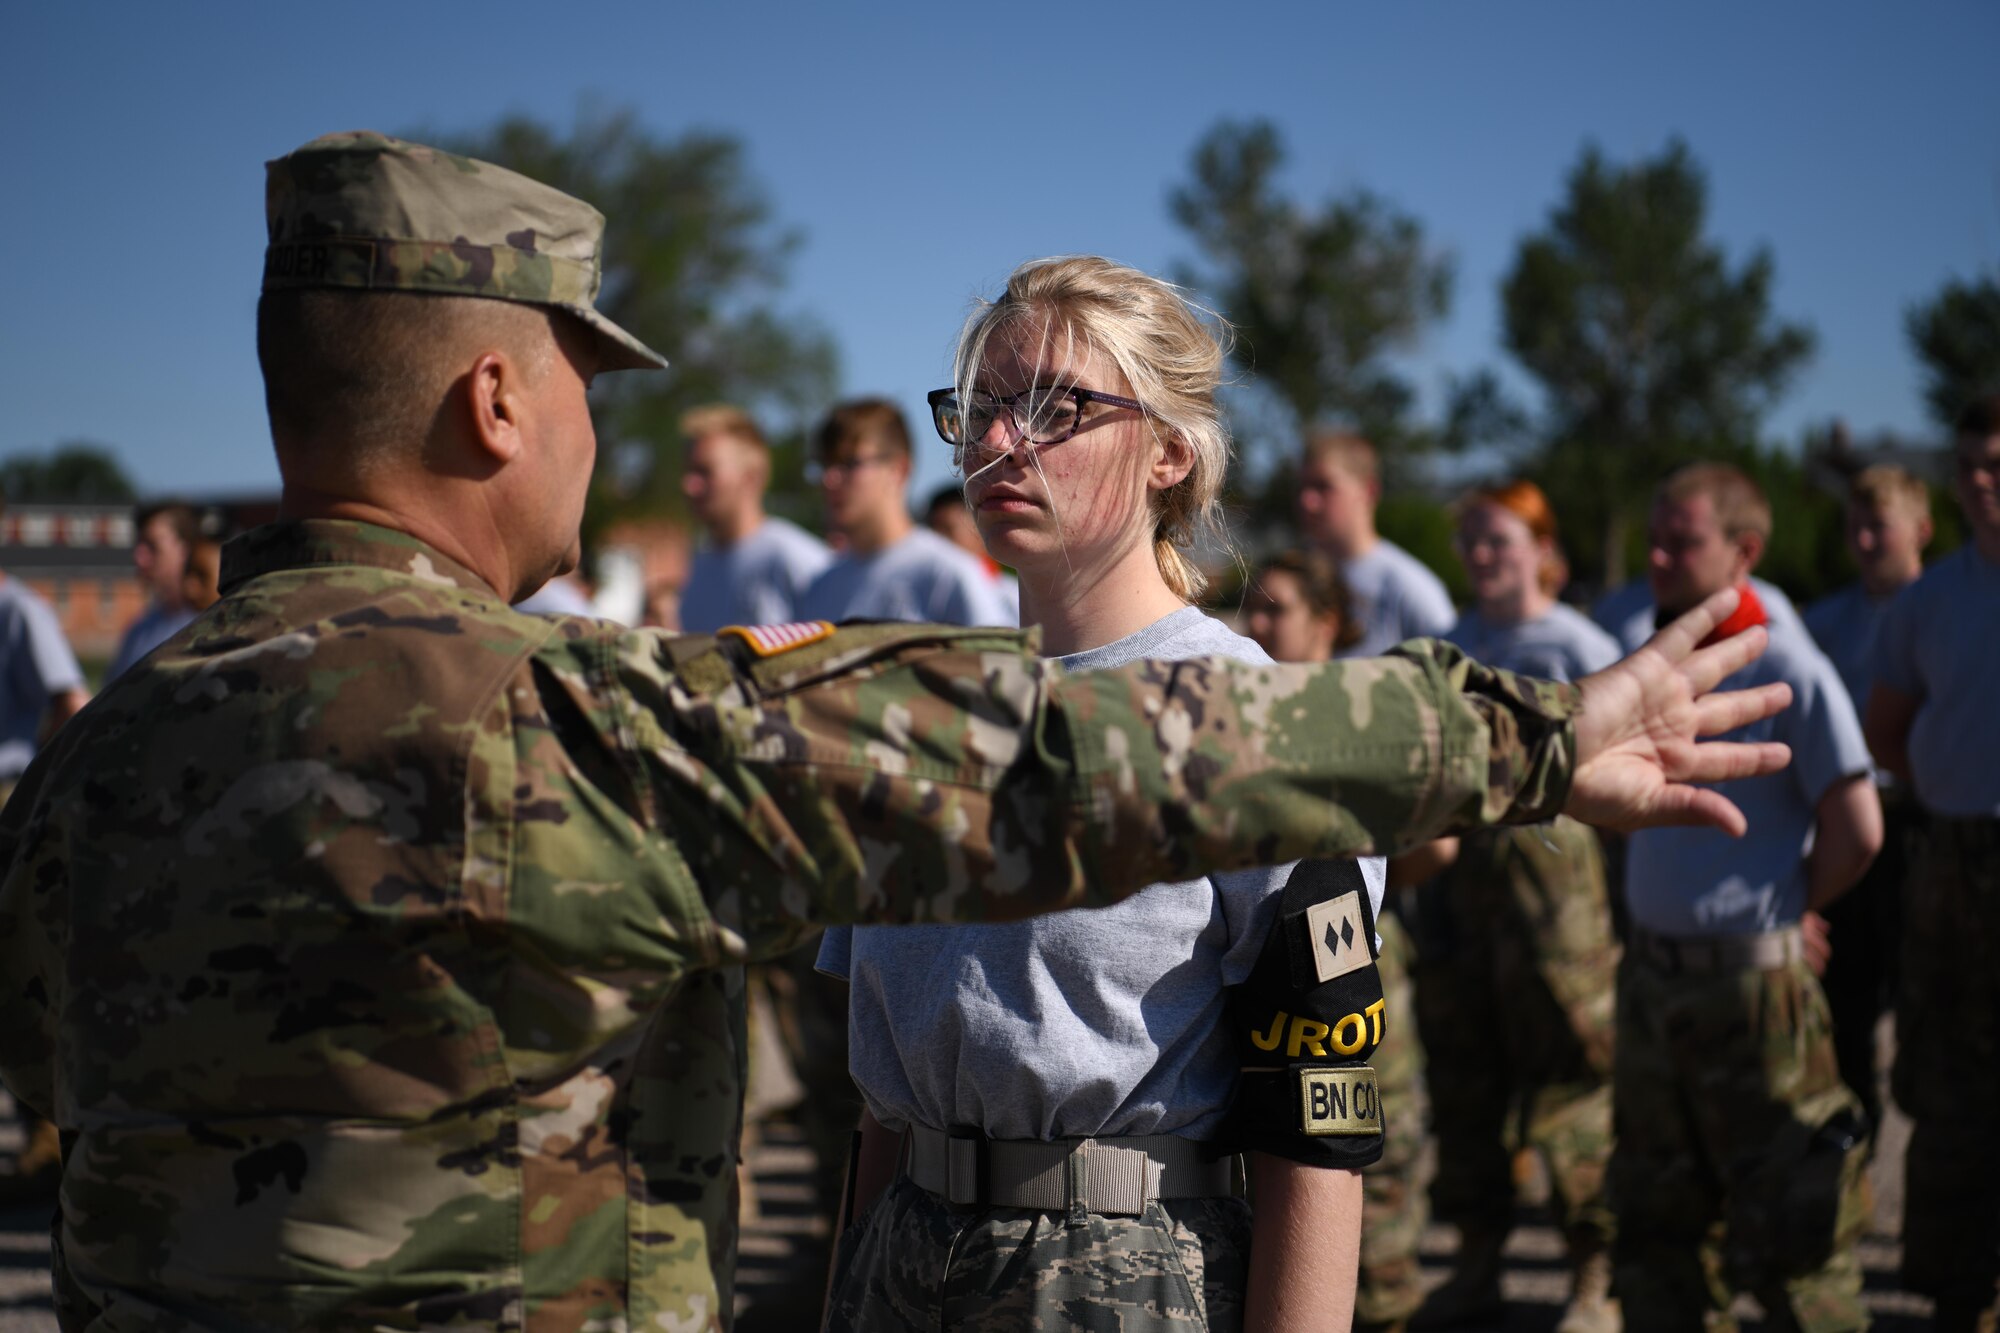 U.S. Army Sgt. Maj. Rodger Harder, instructor for Cheyenne Central High School Army Junior ROTC, instructs Willow Wilson, West Minister High School Air Force Junior ROTC cadet, at F.E. Warren Air Force Base, Wyoming, June 11, 2021. Junior ROTC cadets from five high schools throughout Colorado and Wyoming came to F.E. Warren AFB during Junior ROTC Cadet Leadership Camp. JCLC is a program designed to develop community involvement and leadership skills of high school students. (U.S. Air Force photo by Airman 1st Class Charles Munoz)